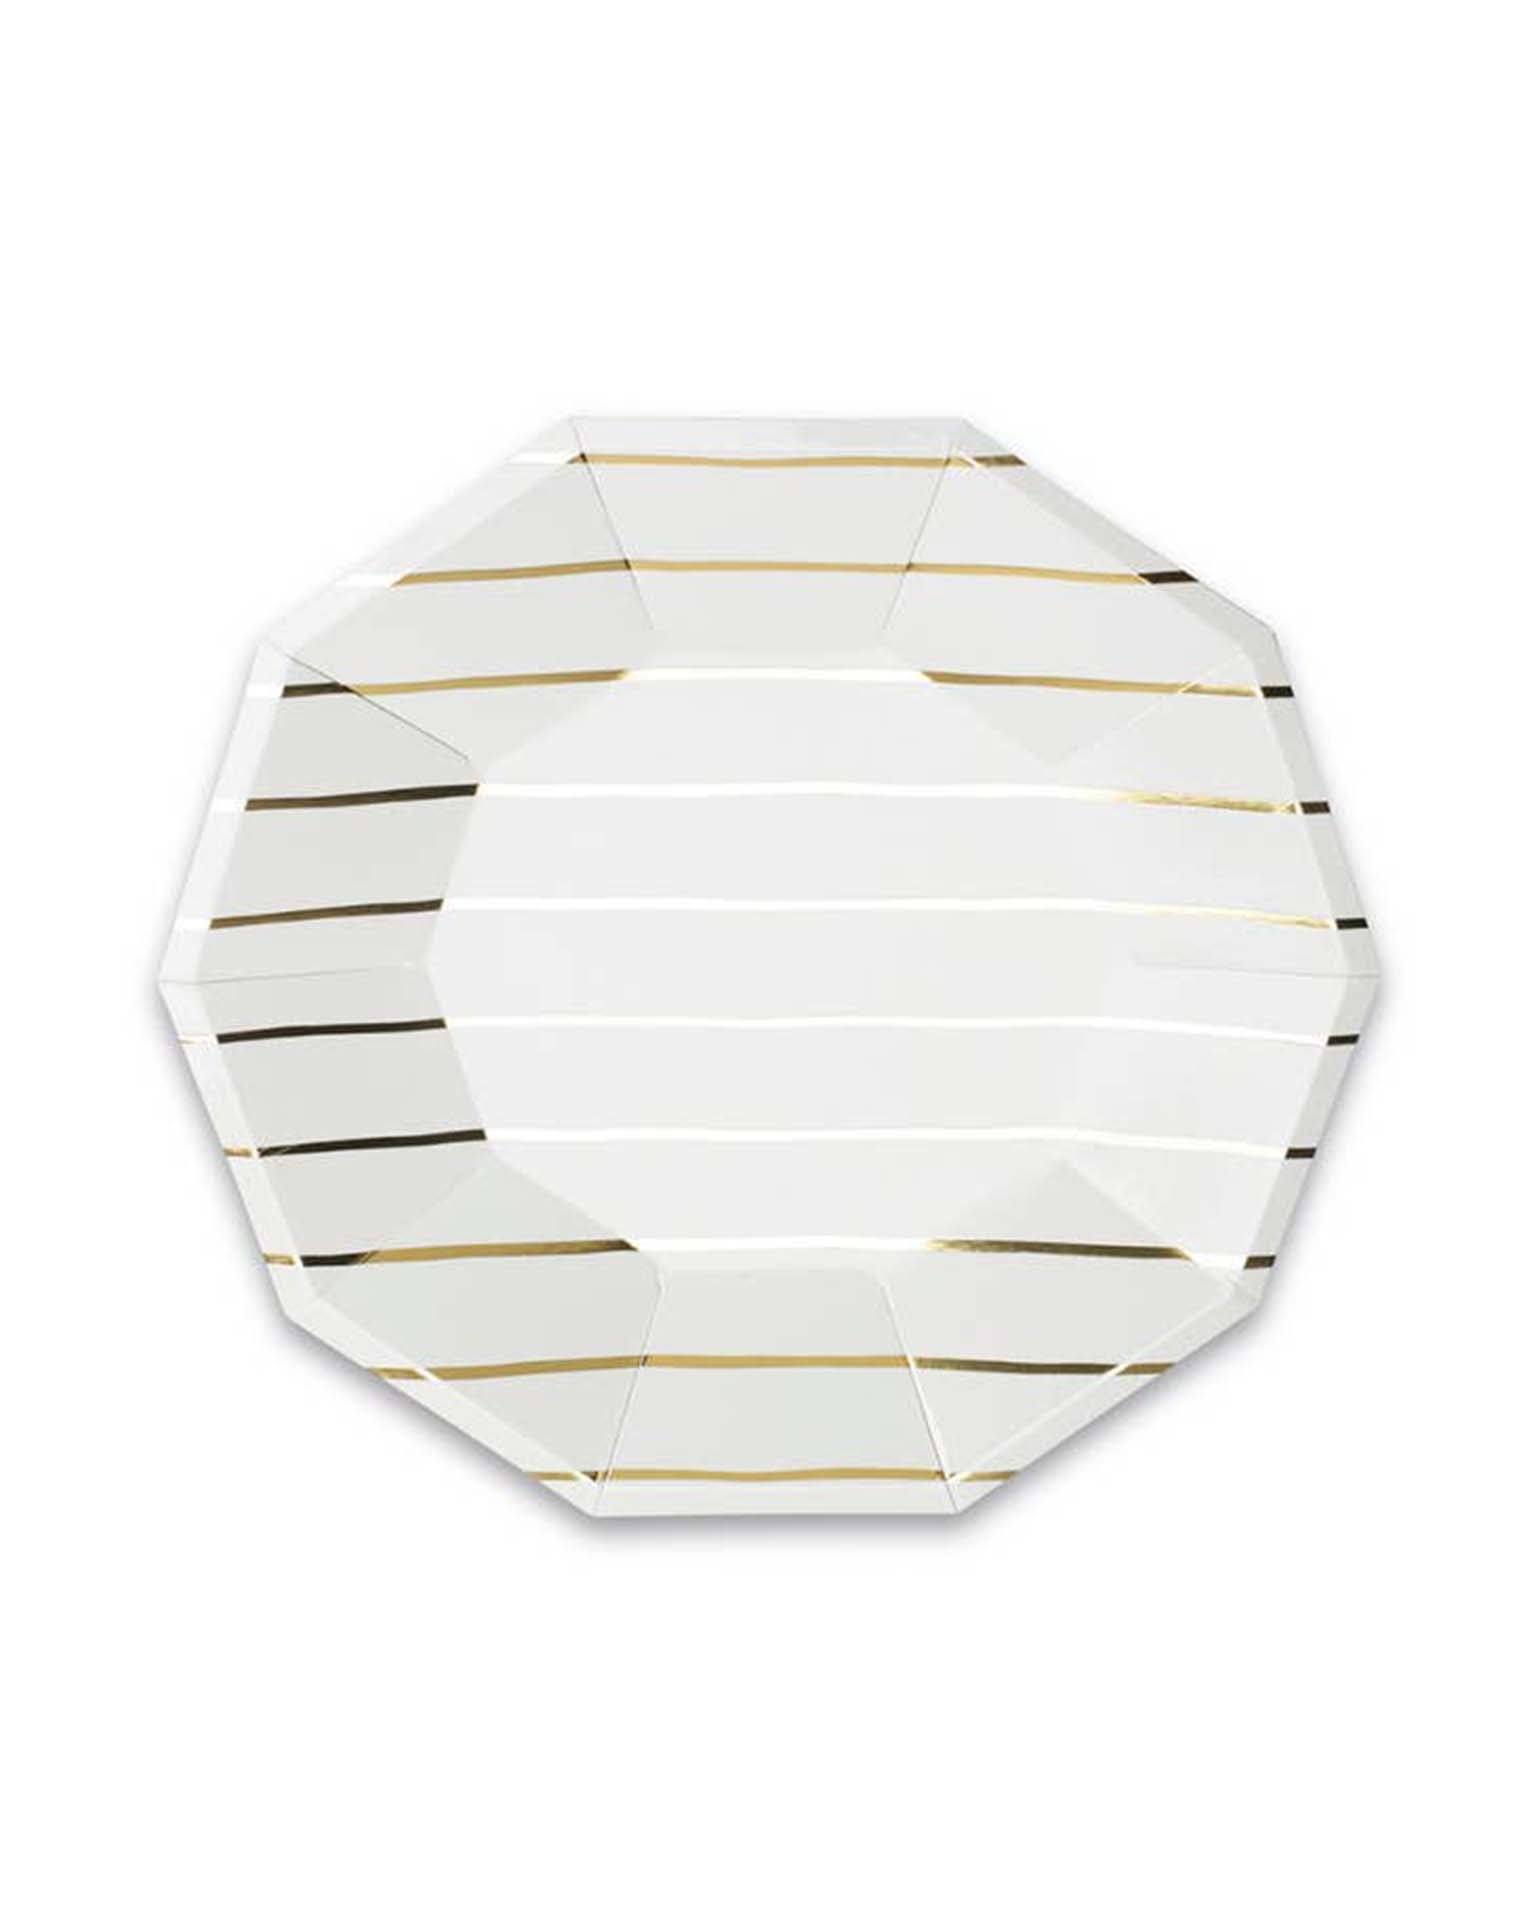 Little Daydream Society party gold frenchie striped small plates